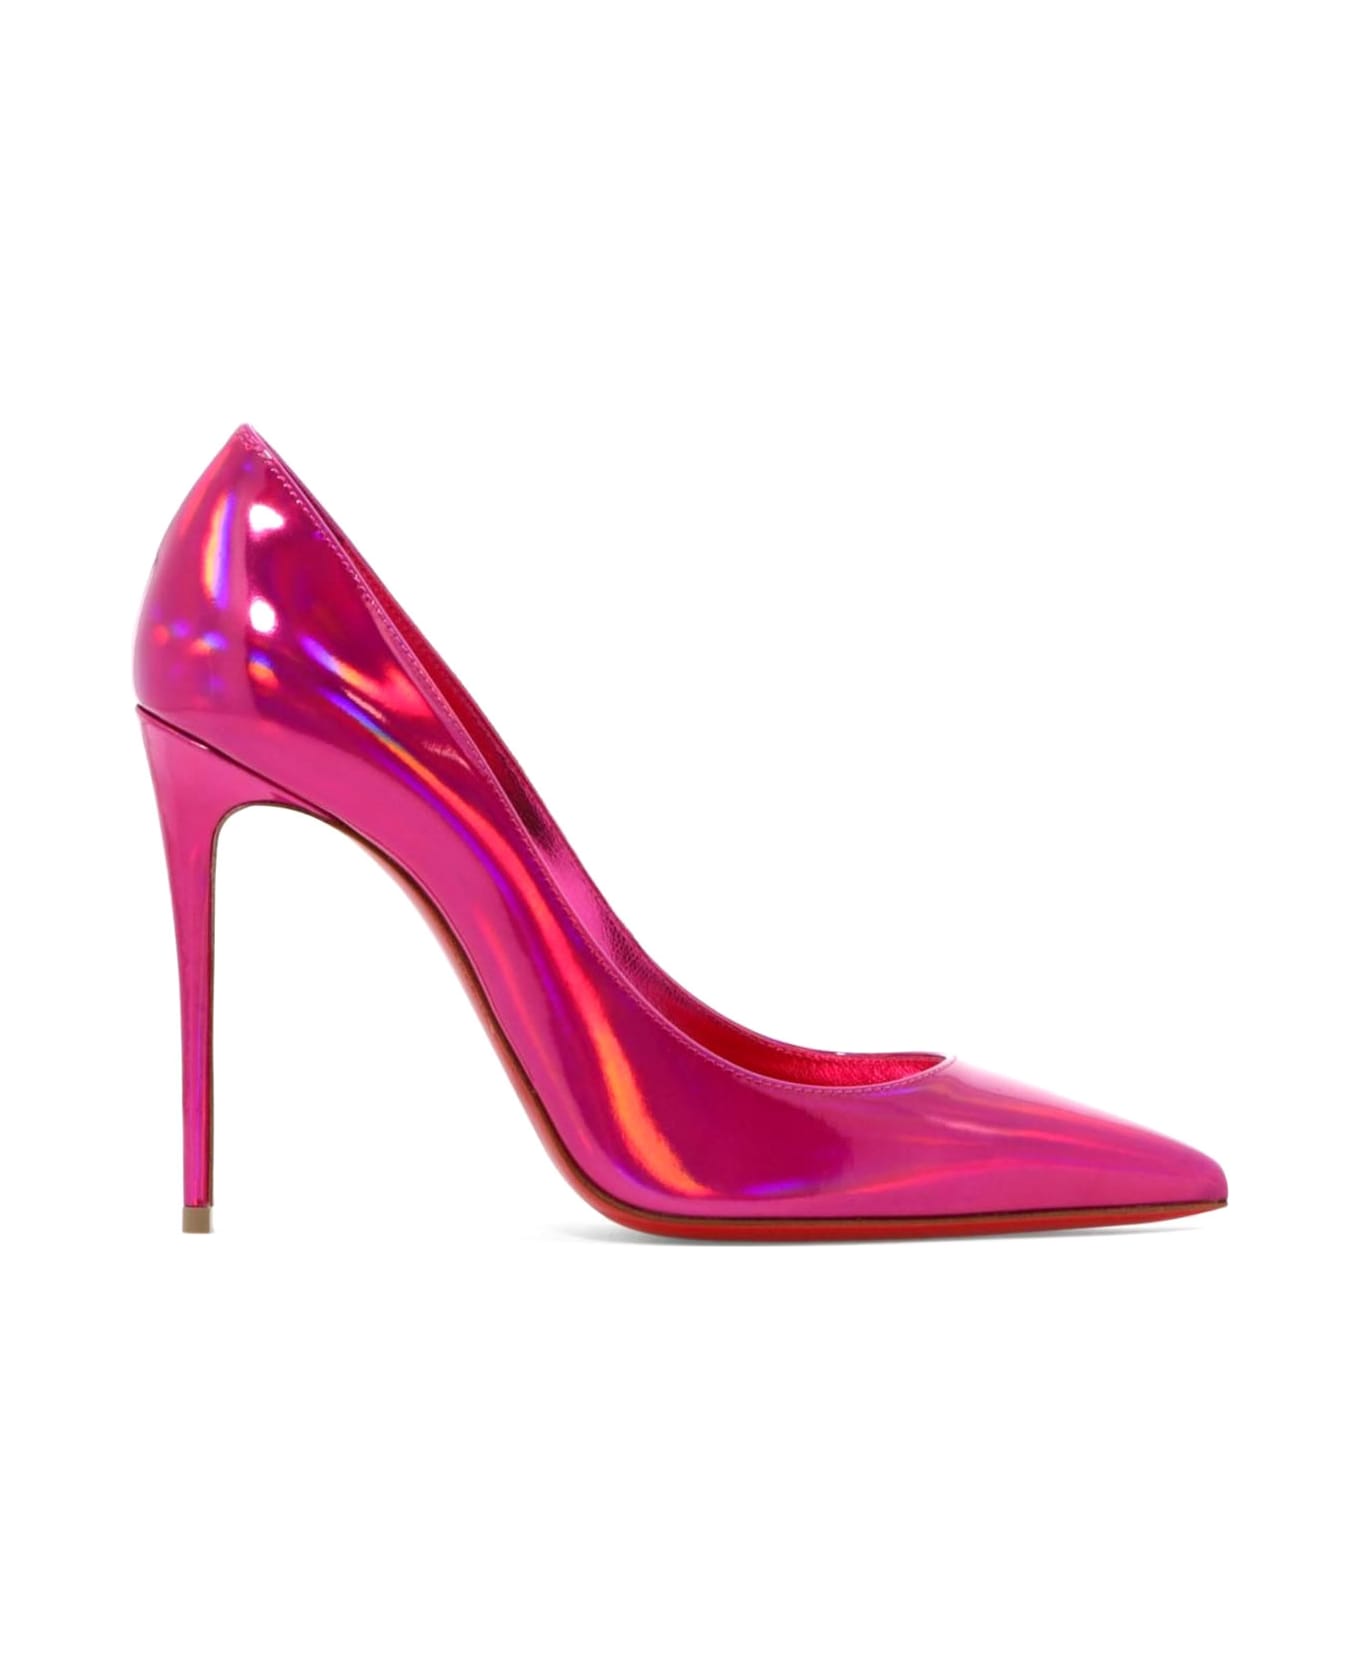 Christian Louboutin Kate Patent Psychic Leather Pumps - FUXIA